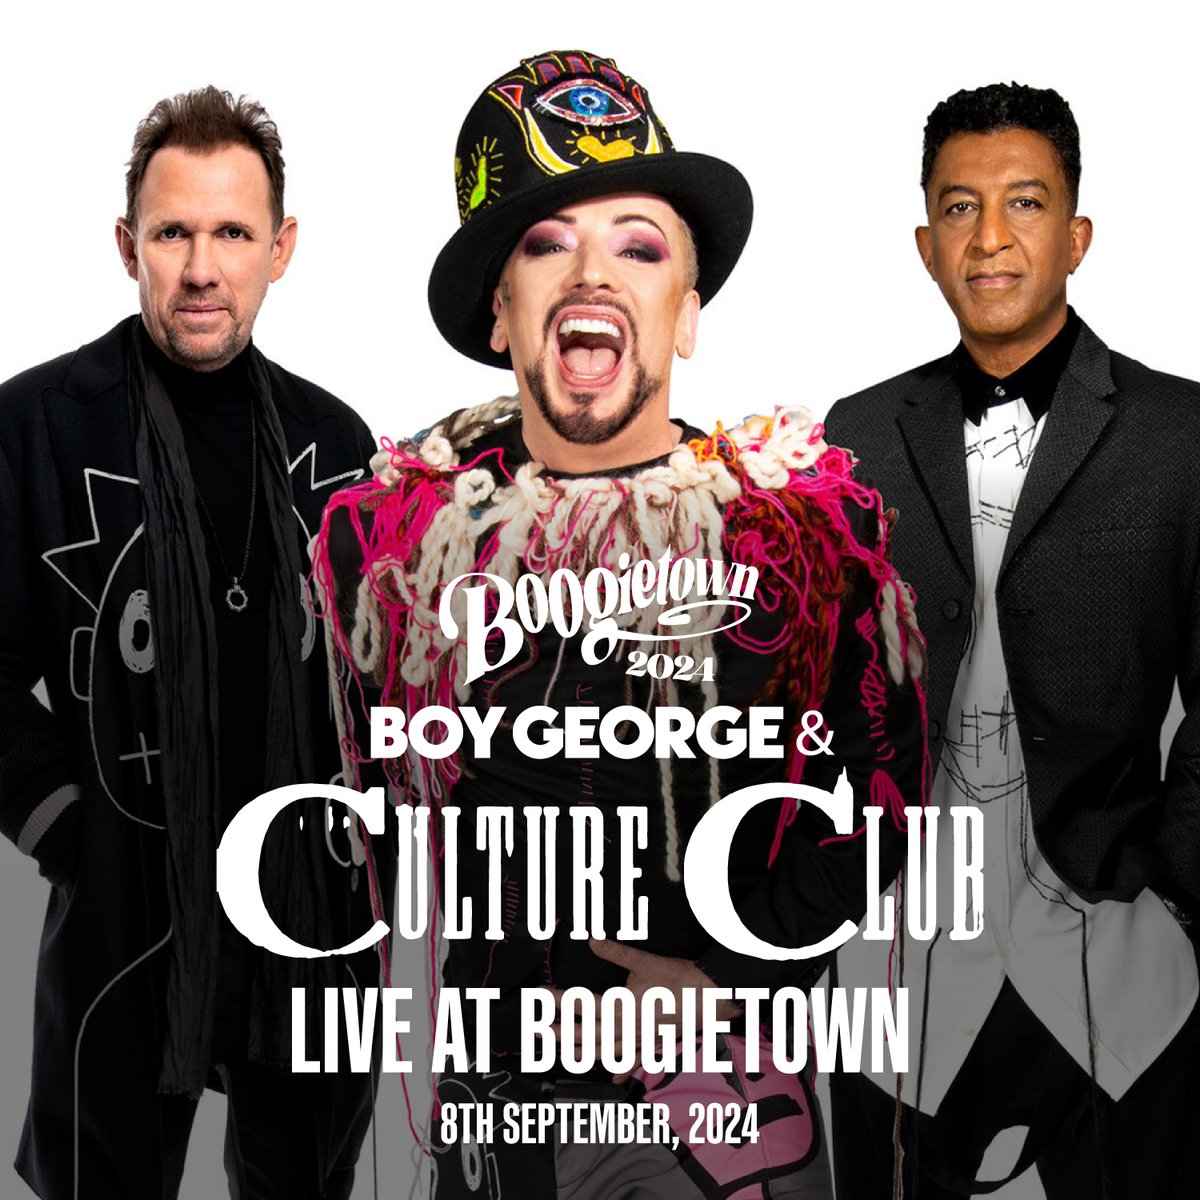 Get ready to groove with us at @boogietownfest on Sunday, September 8th, at Apps Court, Surrey! 🌟 It's going to be an unforgettable weekend filled with music, fun, and fabulous vibes. Grab your tickets now! boygeorgeandcultureclub.net/tour/